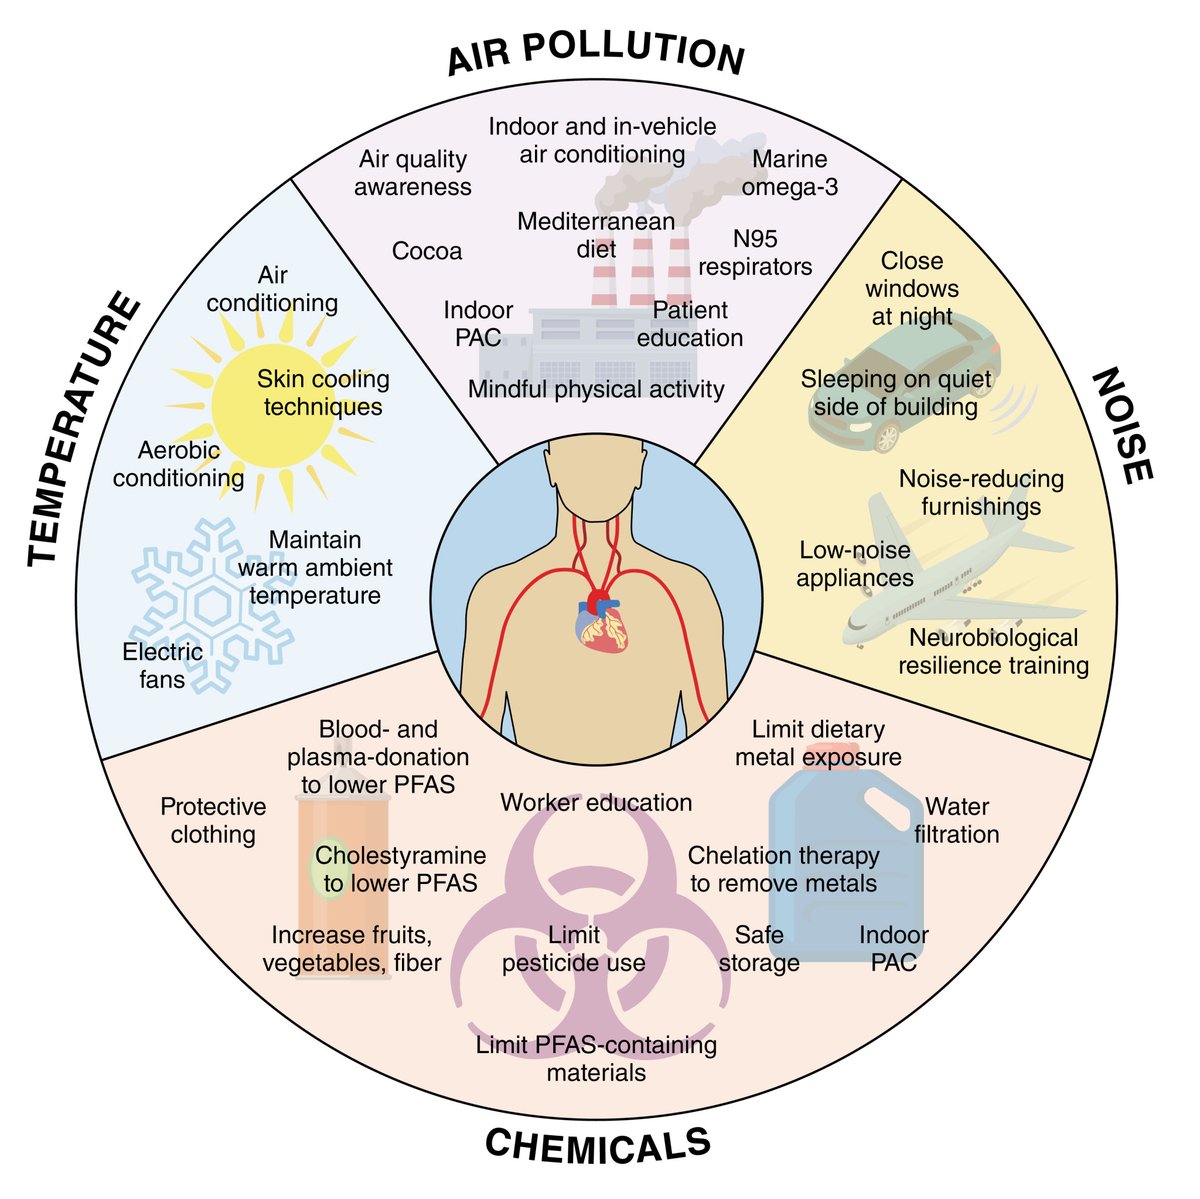 @CircRes #Environmental Impacts on #Cardiovascular Health and #Biology Compendium Alert! Personal Strategies to Reduce the Cardiovascular Impacts of Environmental Exposures ahajrnls.org/3y3Uqqd Authored by Drs. @LukeBonanni & @jdnewmanMDMPH